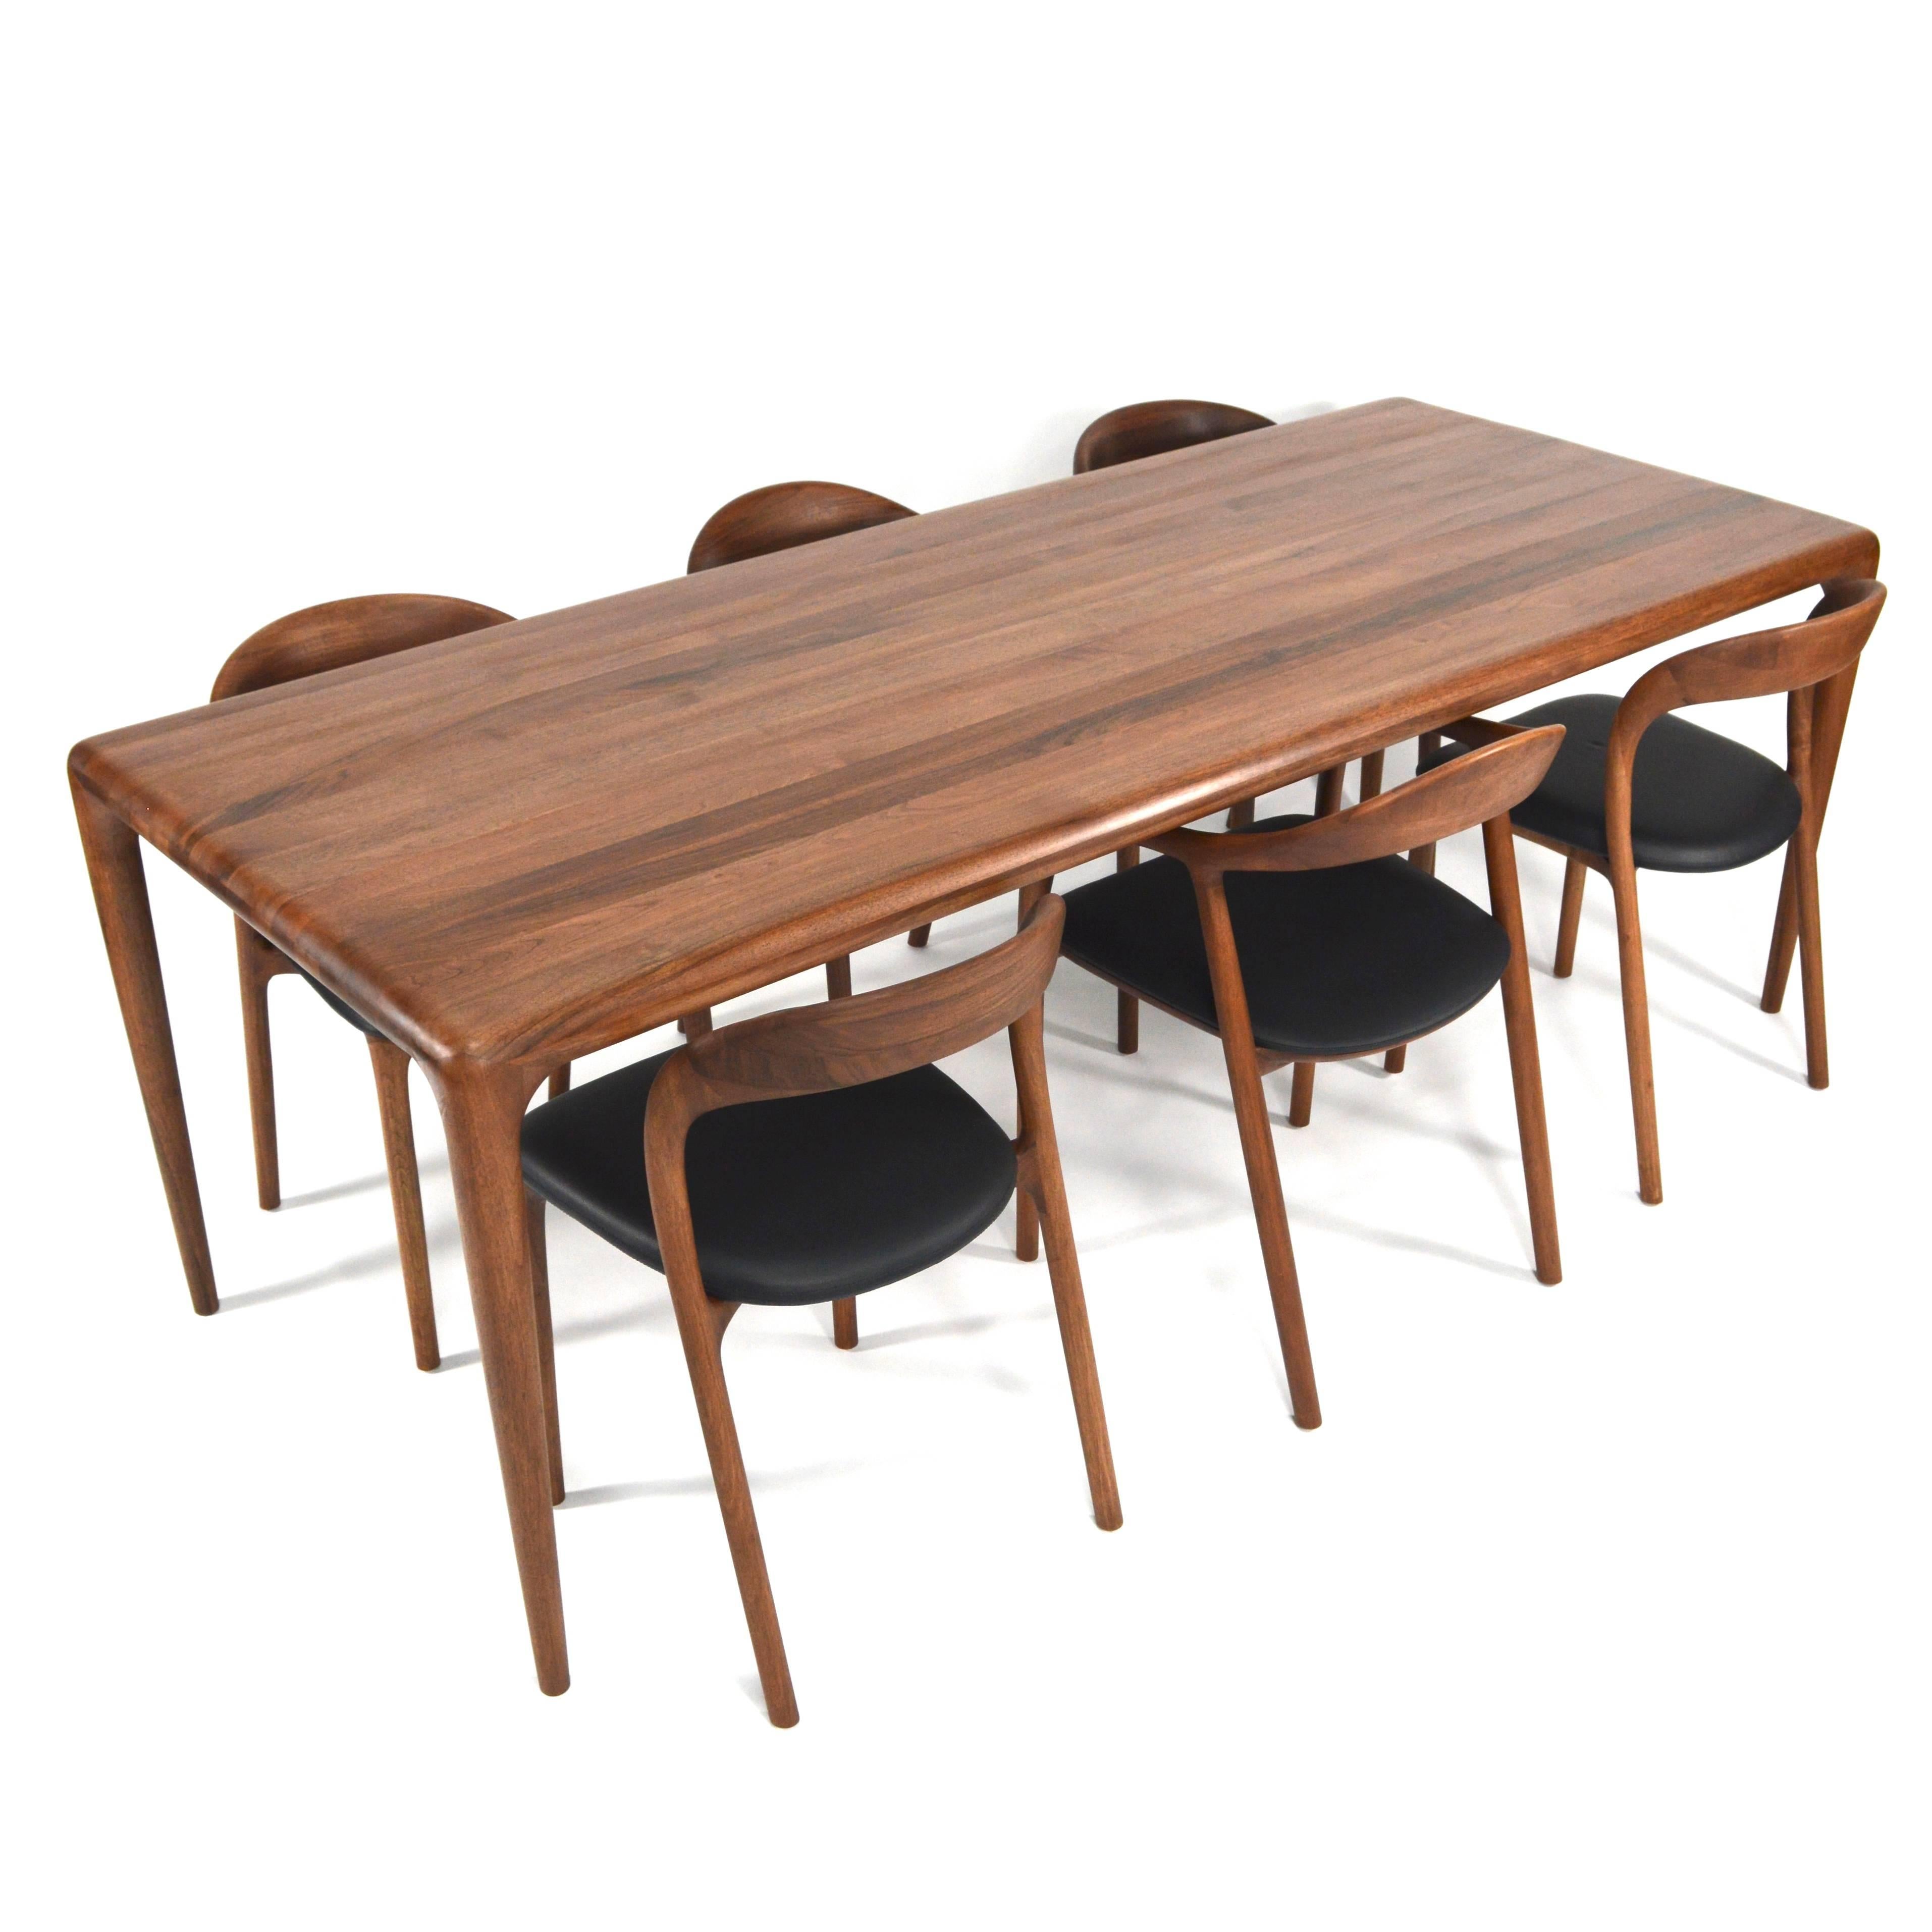 Absolutely gorgeous dining set by Artisan.
Designers.
Table: Salih Teskeredzic.
Chairs: Ruđer Novak-mikulić & Marija Ružić.
Phenomenal handcrafted wood work. This is the best of the best a can be ordered in different types of wood. It is